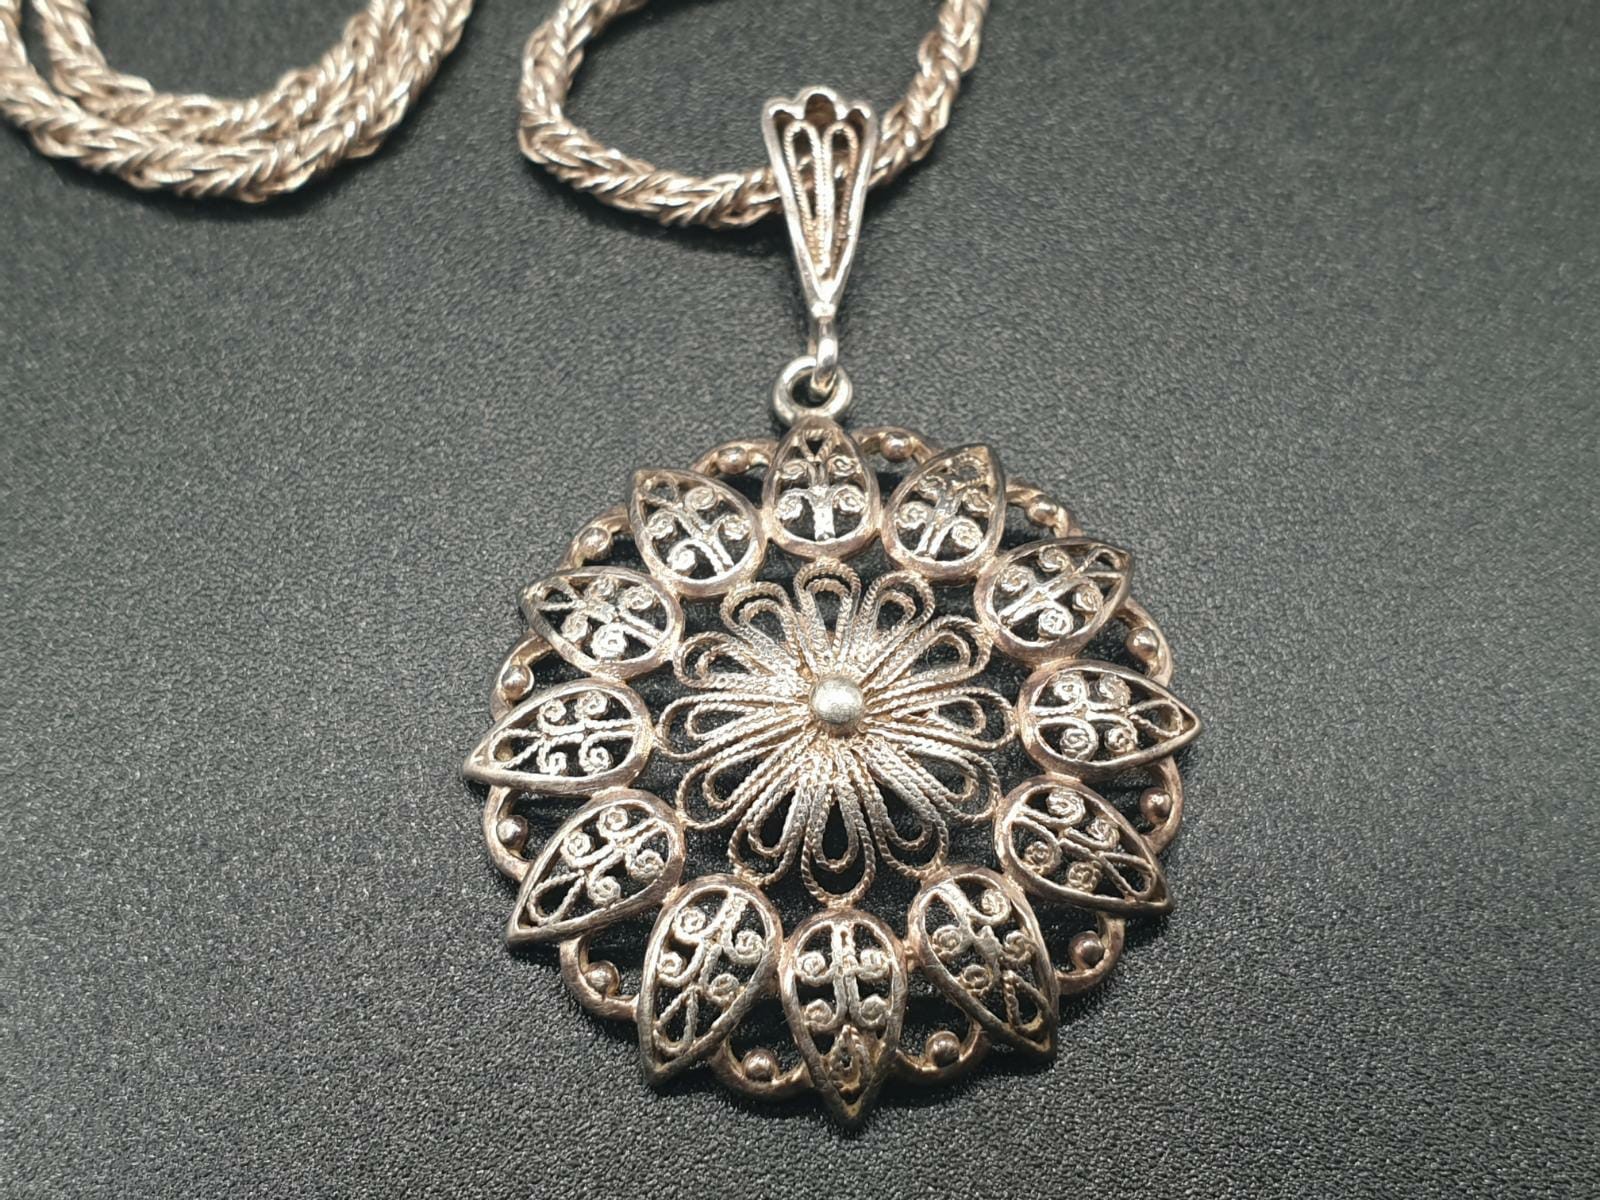 Vintage Silver Rope-Link Necklace with Flower Decorated Pendant. 36cm. 9.85g - Image 5 of 8